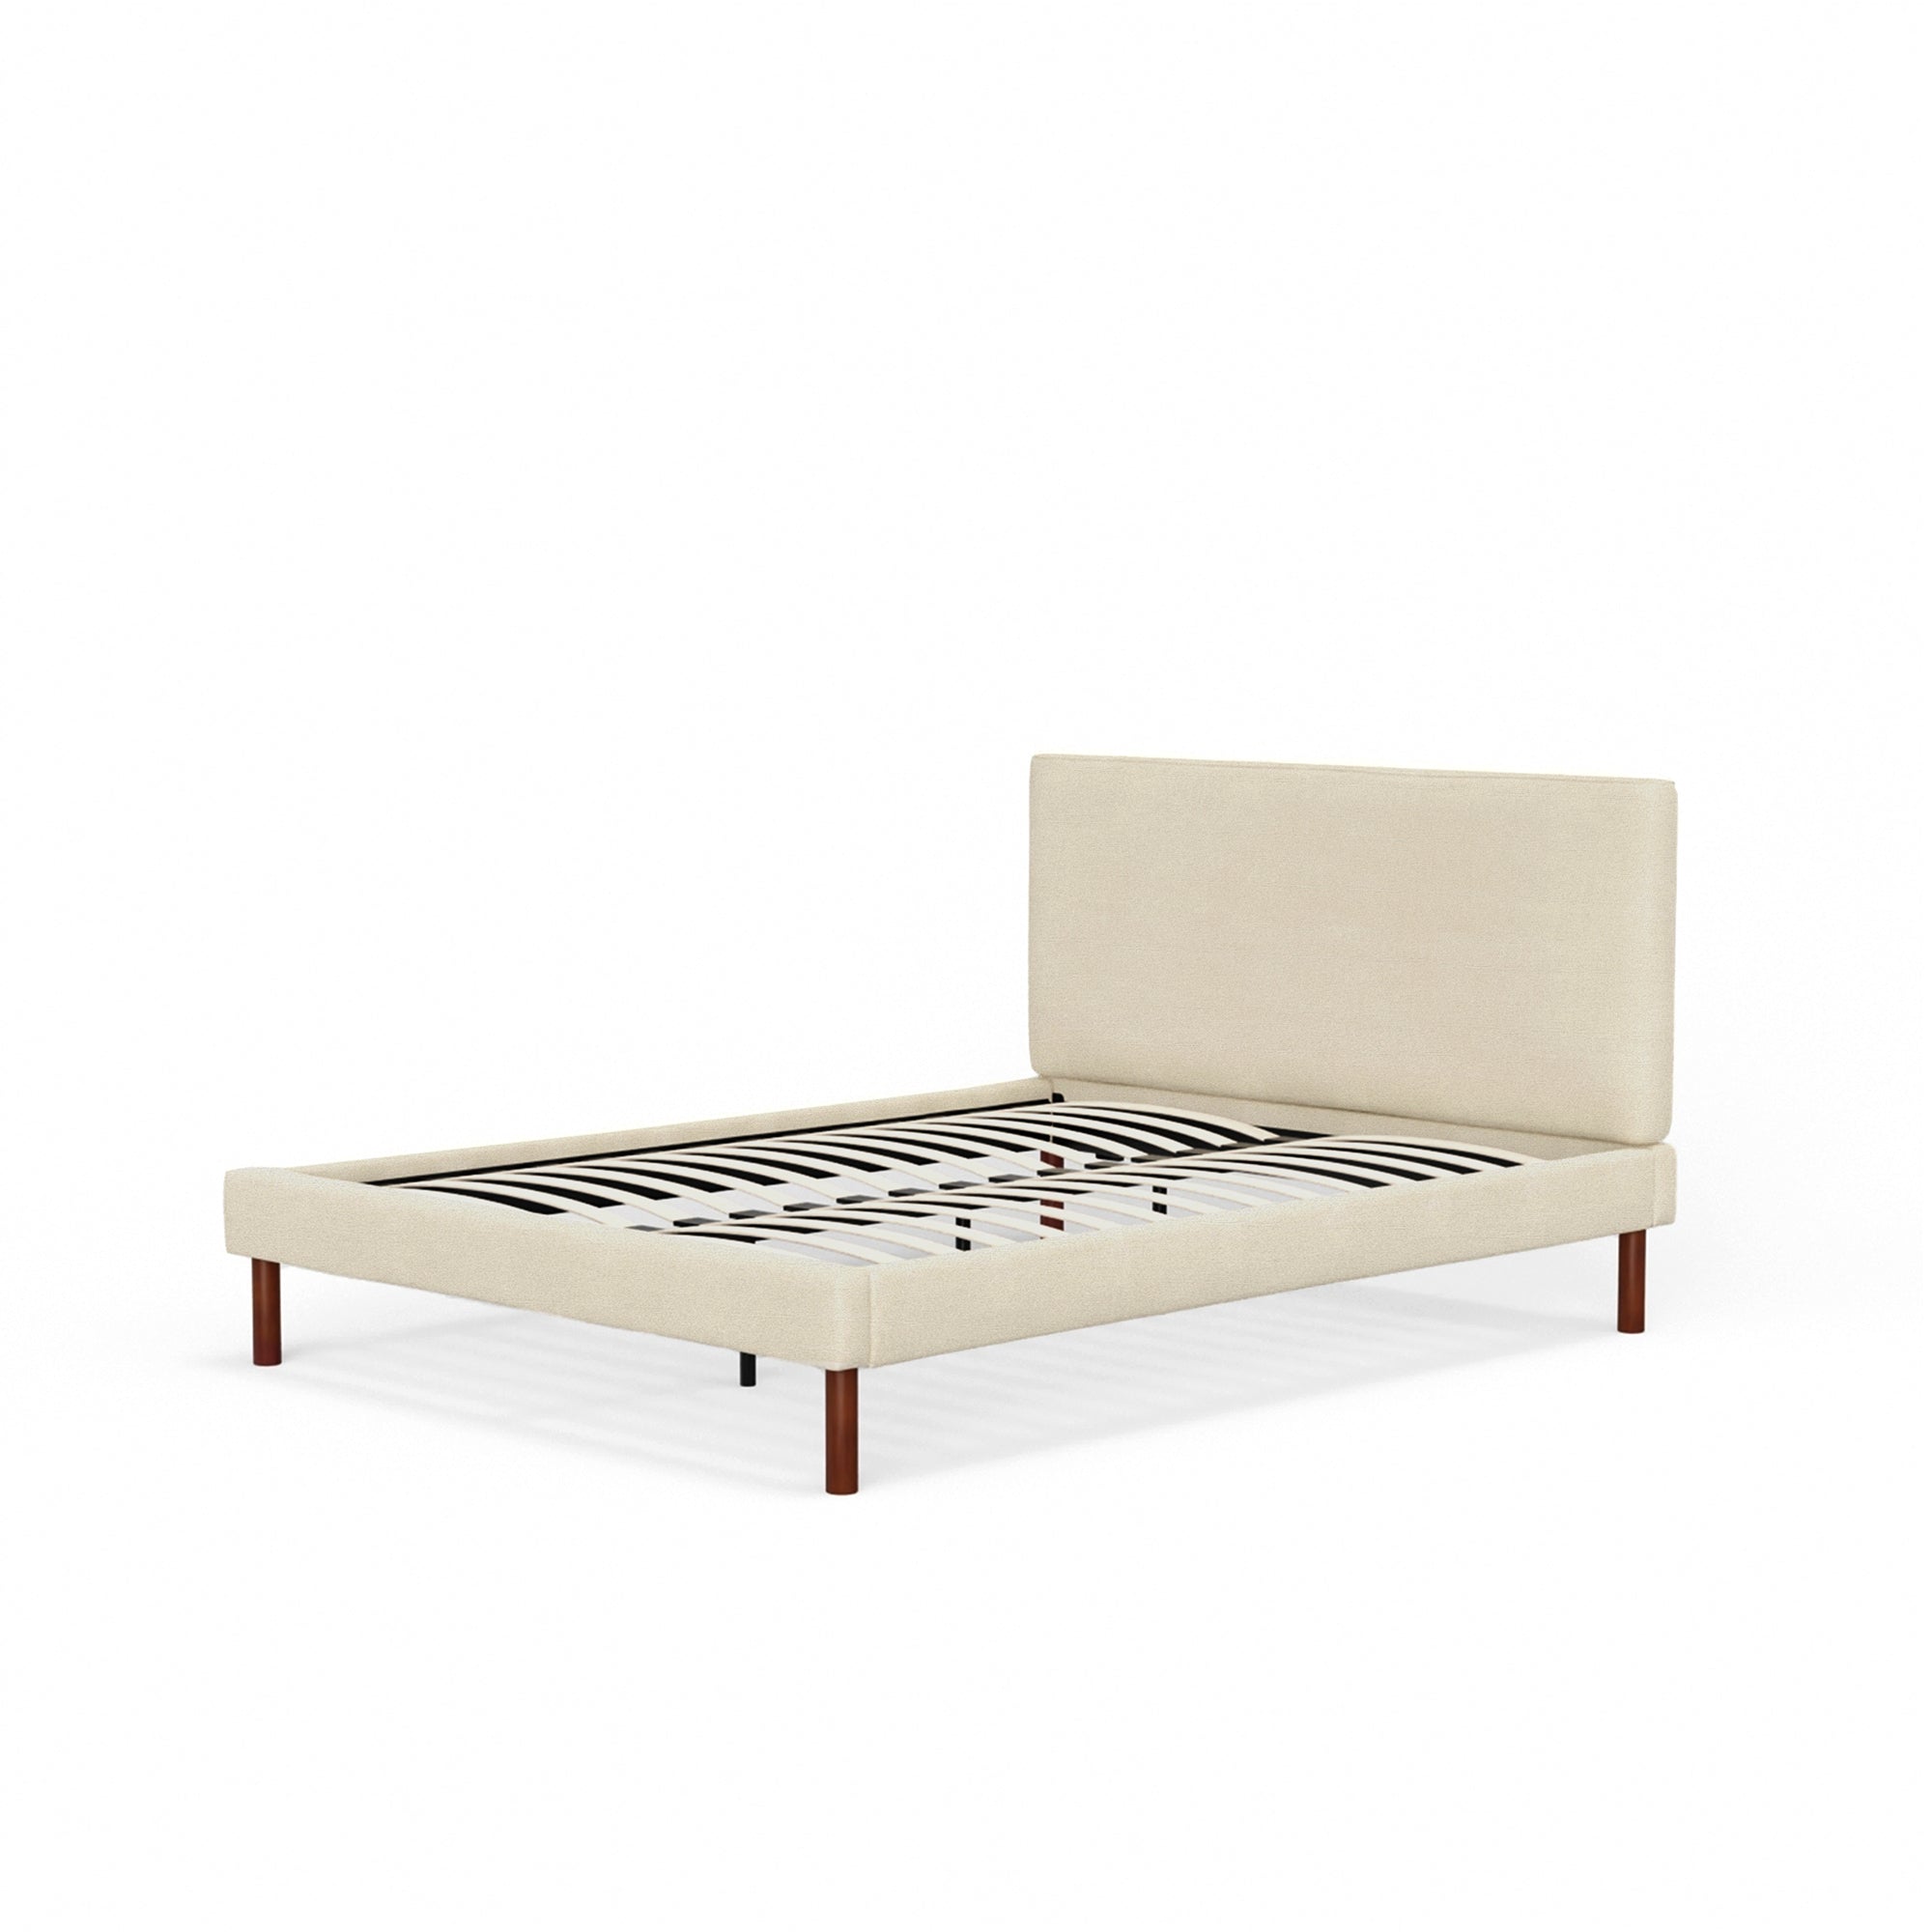 Bailey Platform Bed and Upholstered Headboard Combo